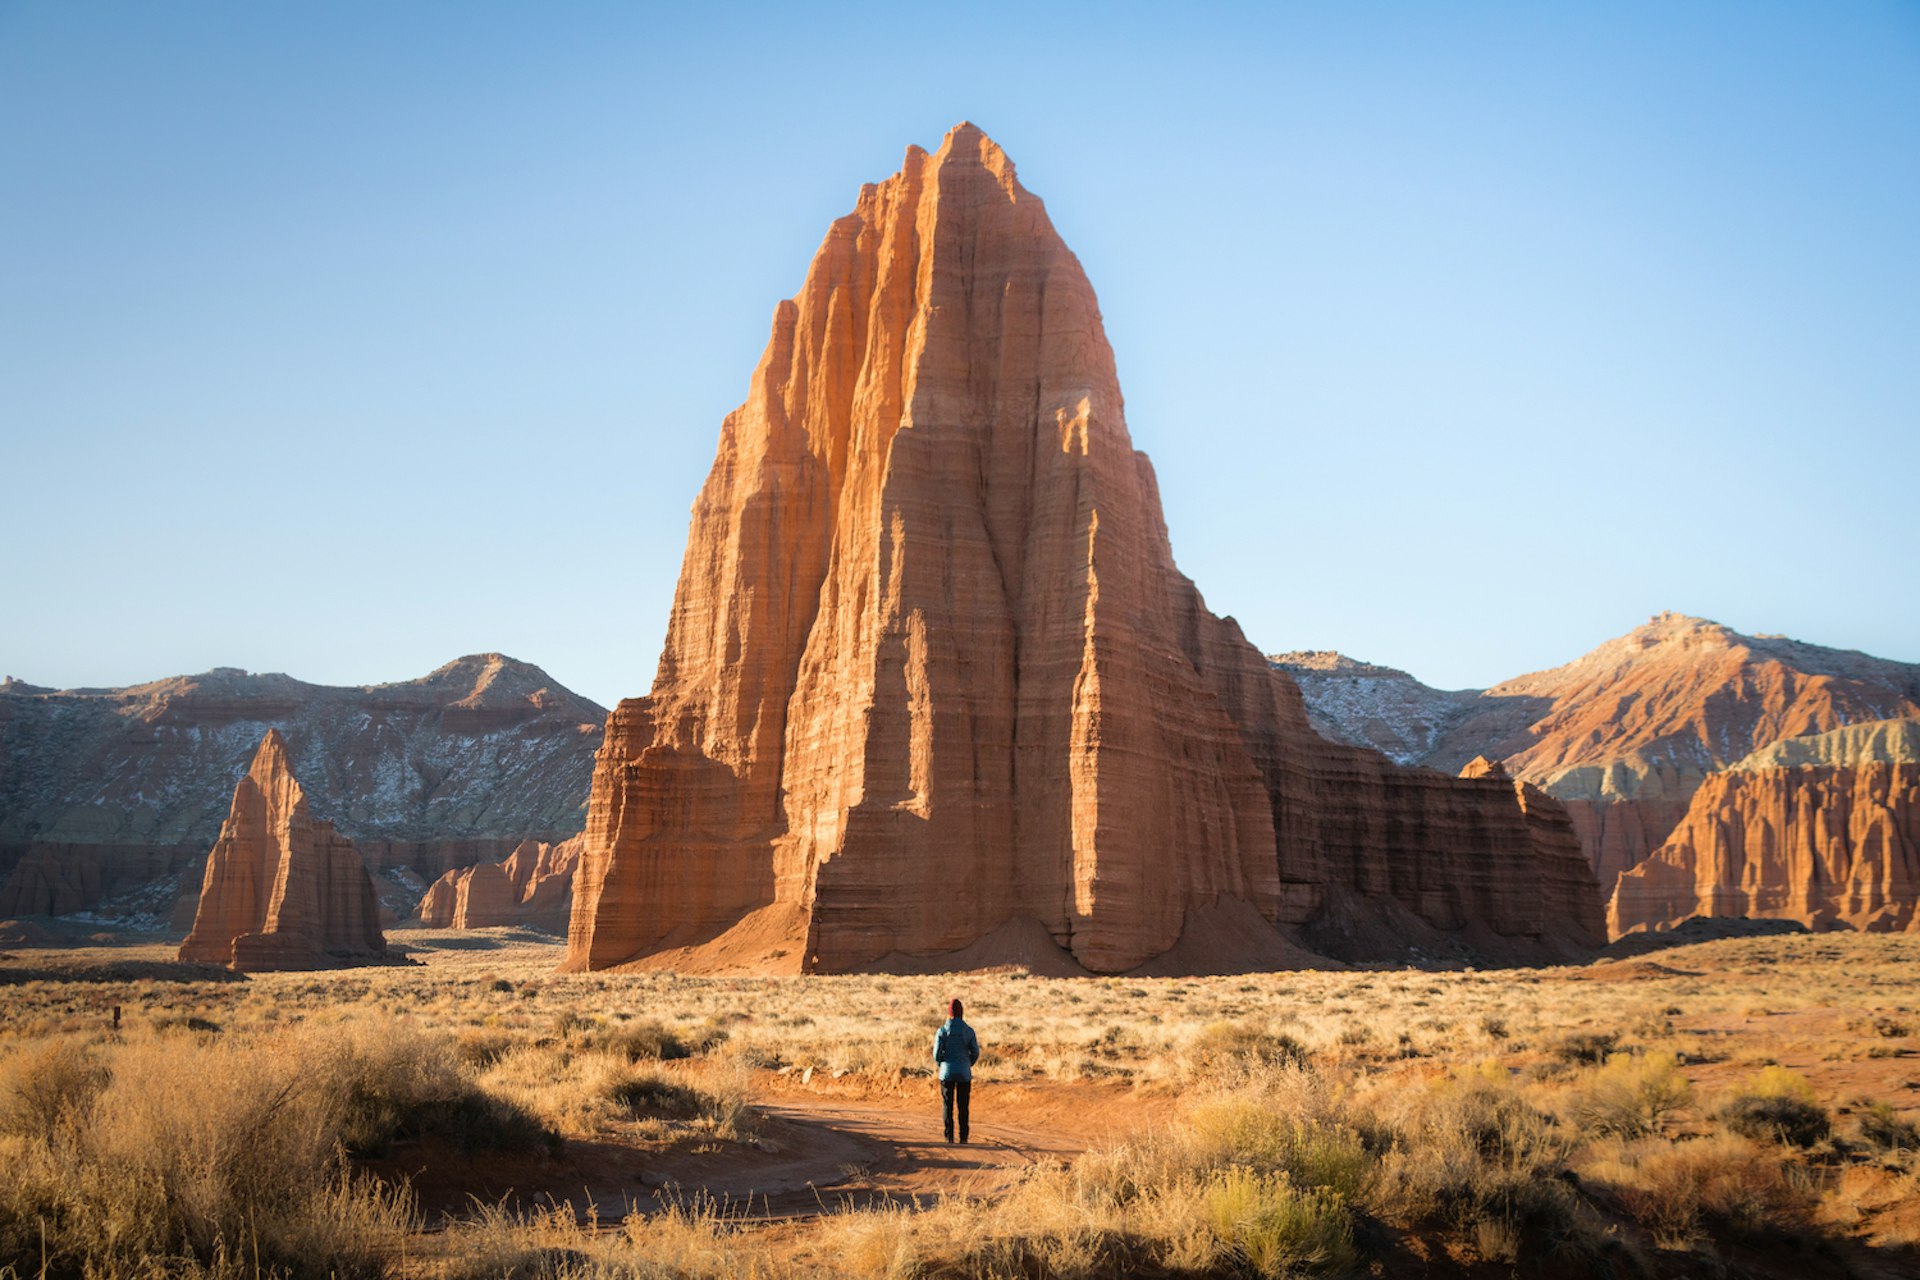 A man stands in front of the Temple of the Sun rock formation, Capitol Reef National Park, Utah, USA